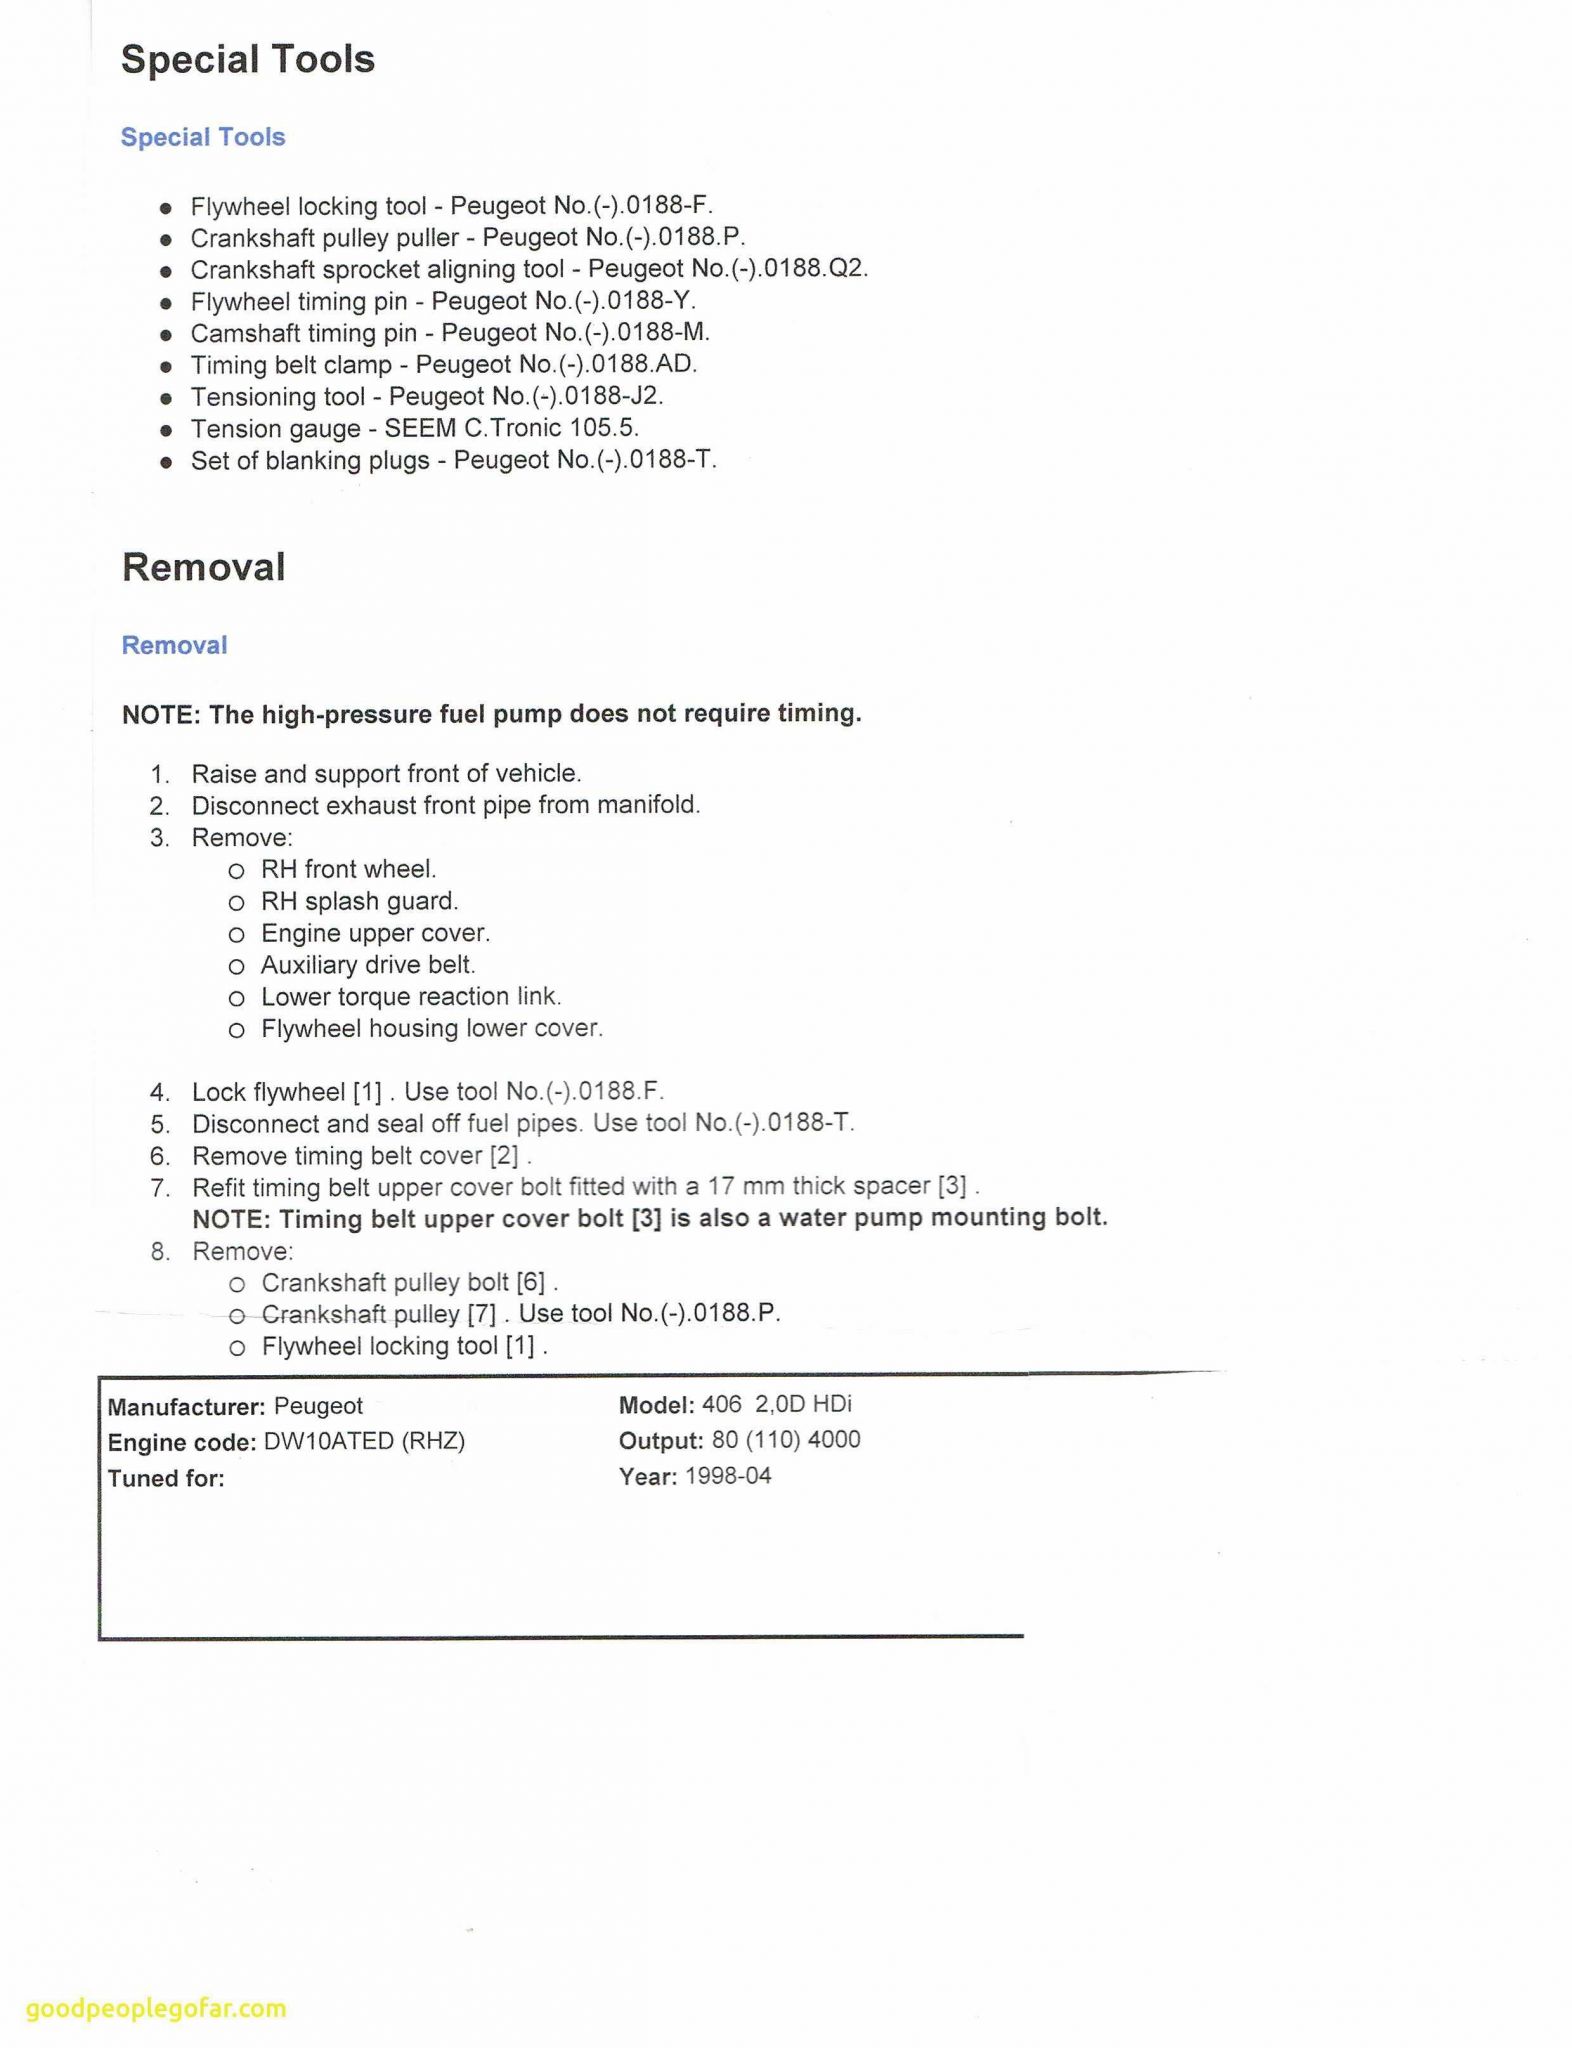 Estimating Sums and Differences Worksheets as Well as Best New Resume Worksheets – Sabaax First Job Resume Emsturs